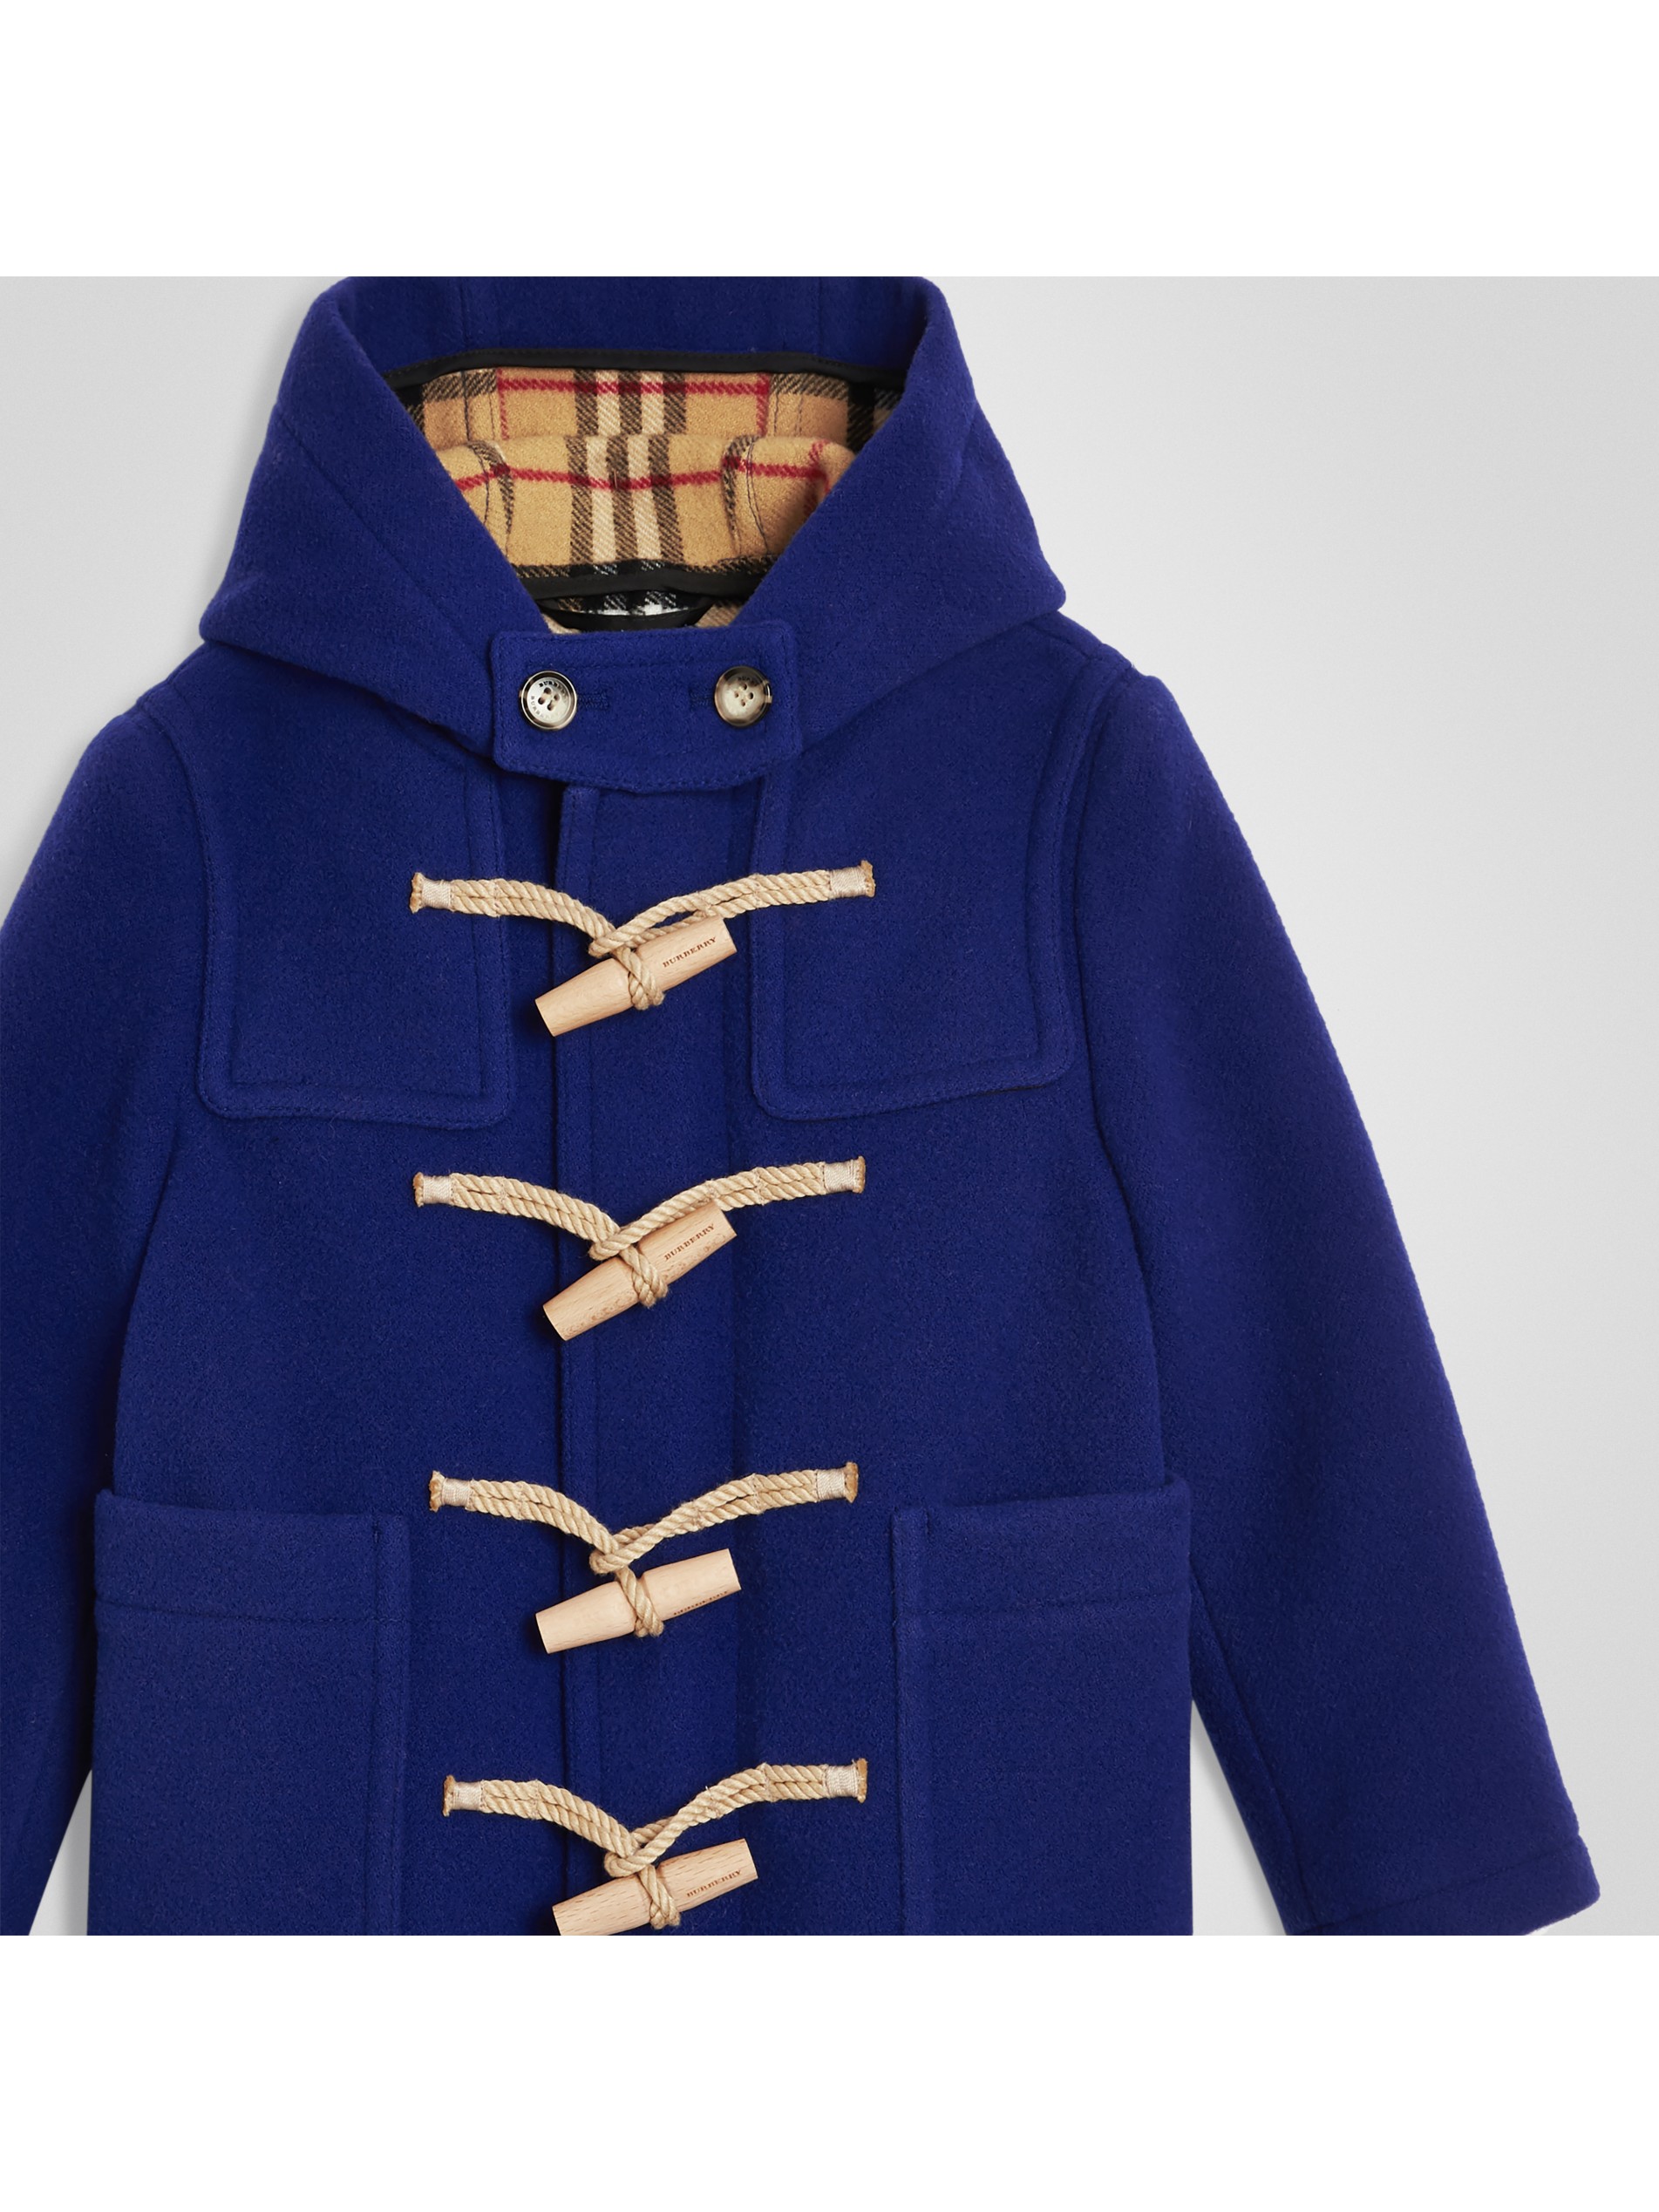 brilliant blue double-faced wool duffle coat image41